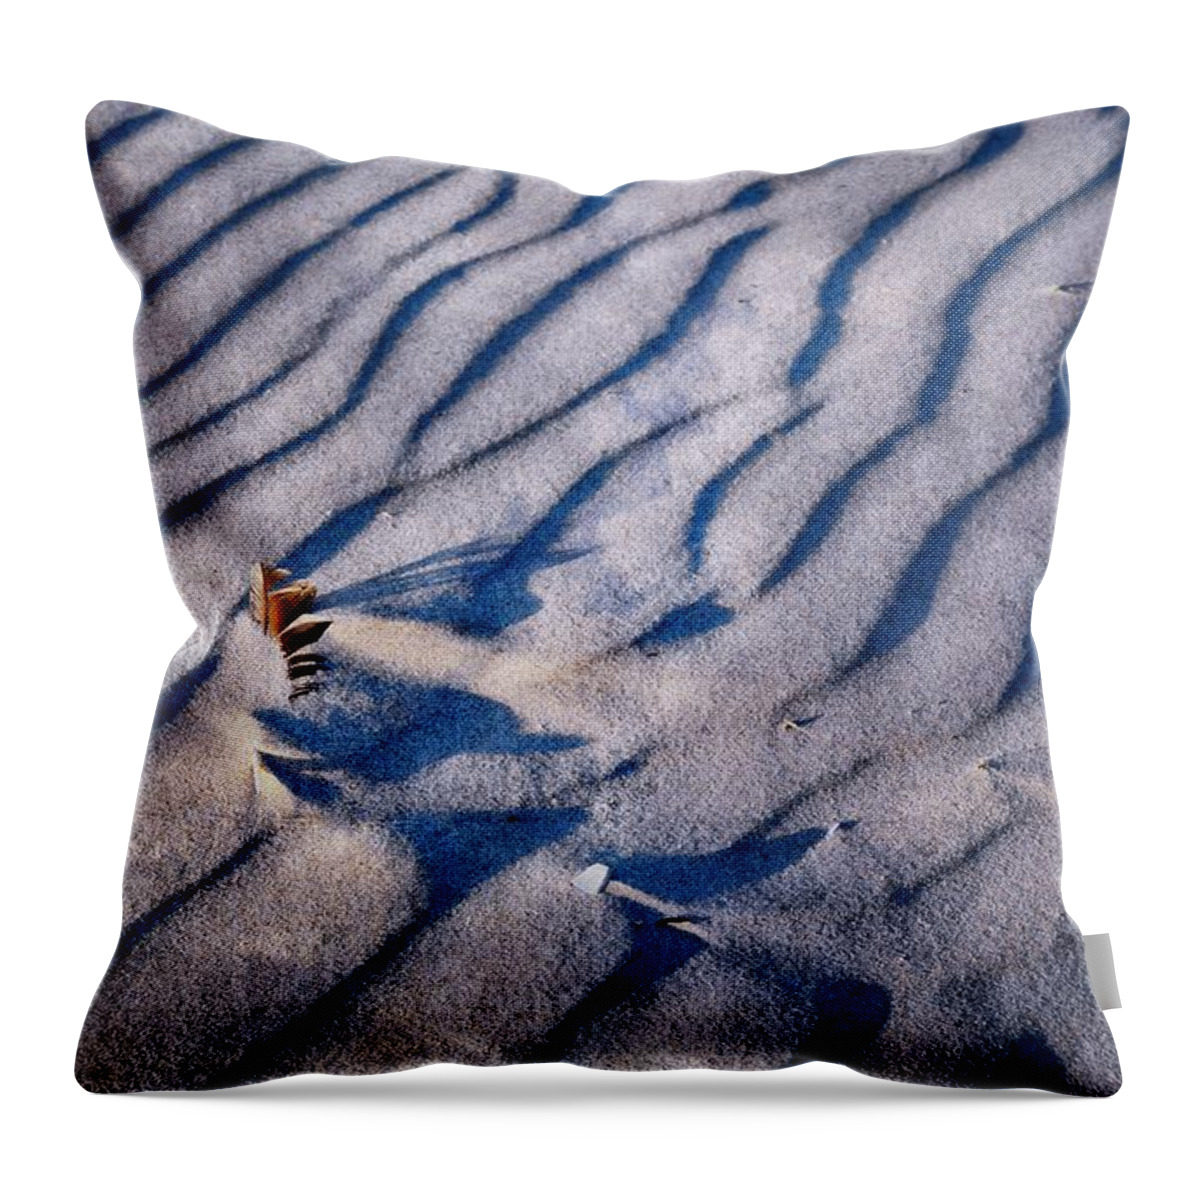 Sand Patterns Throw Pillow featuring the photograph Feather in Sand by Michelle Calkins